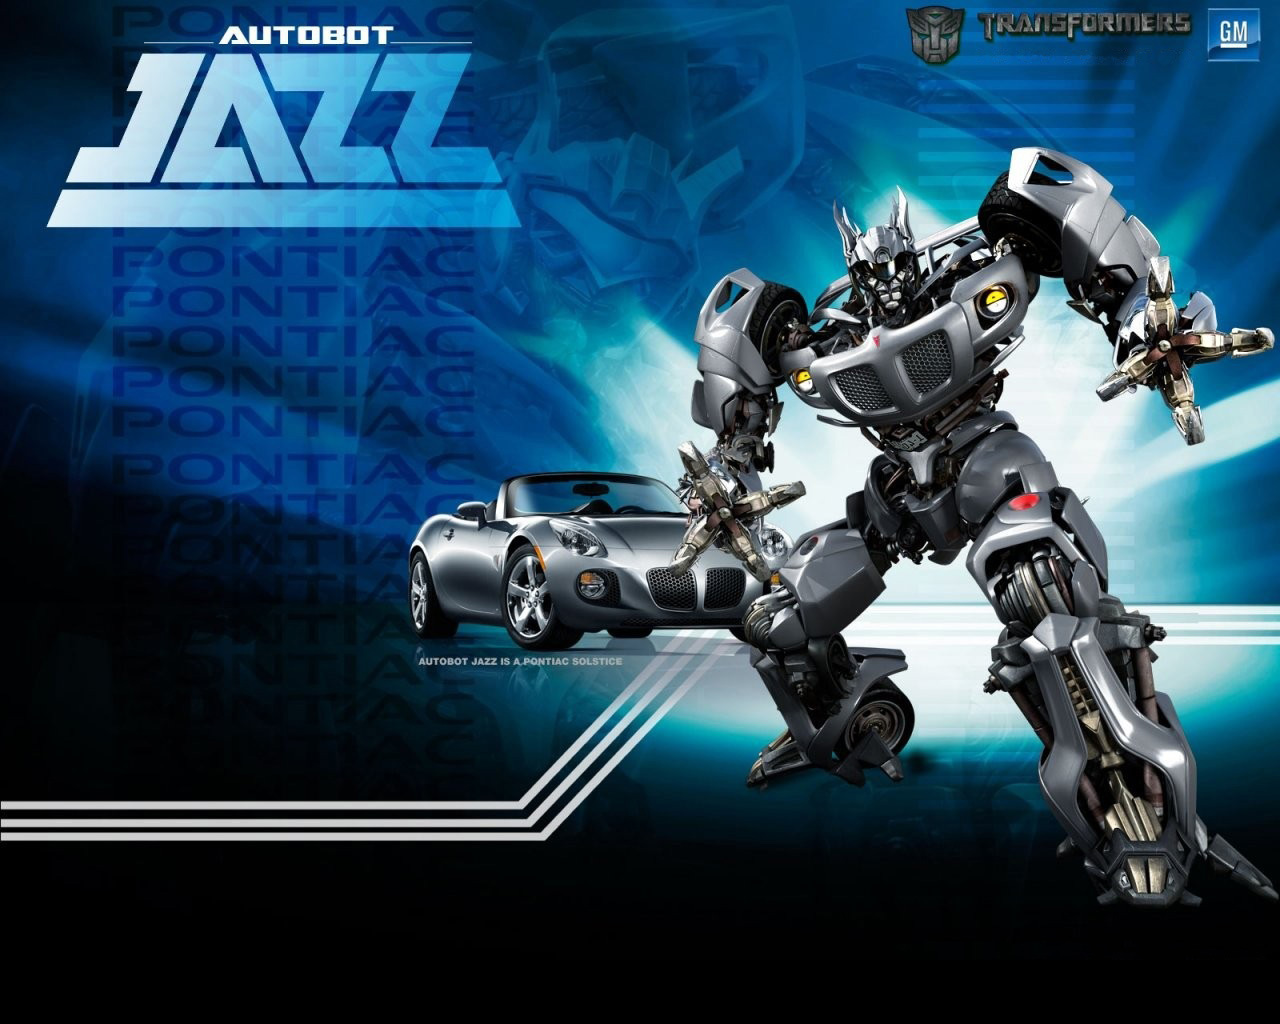 Transformers 3 Dark of the Moon Wallpapers PowerPoint E learning 1280x1024